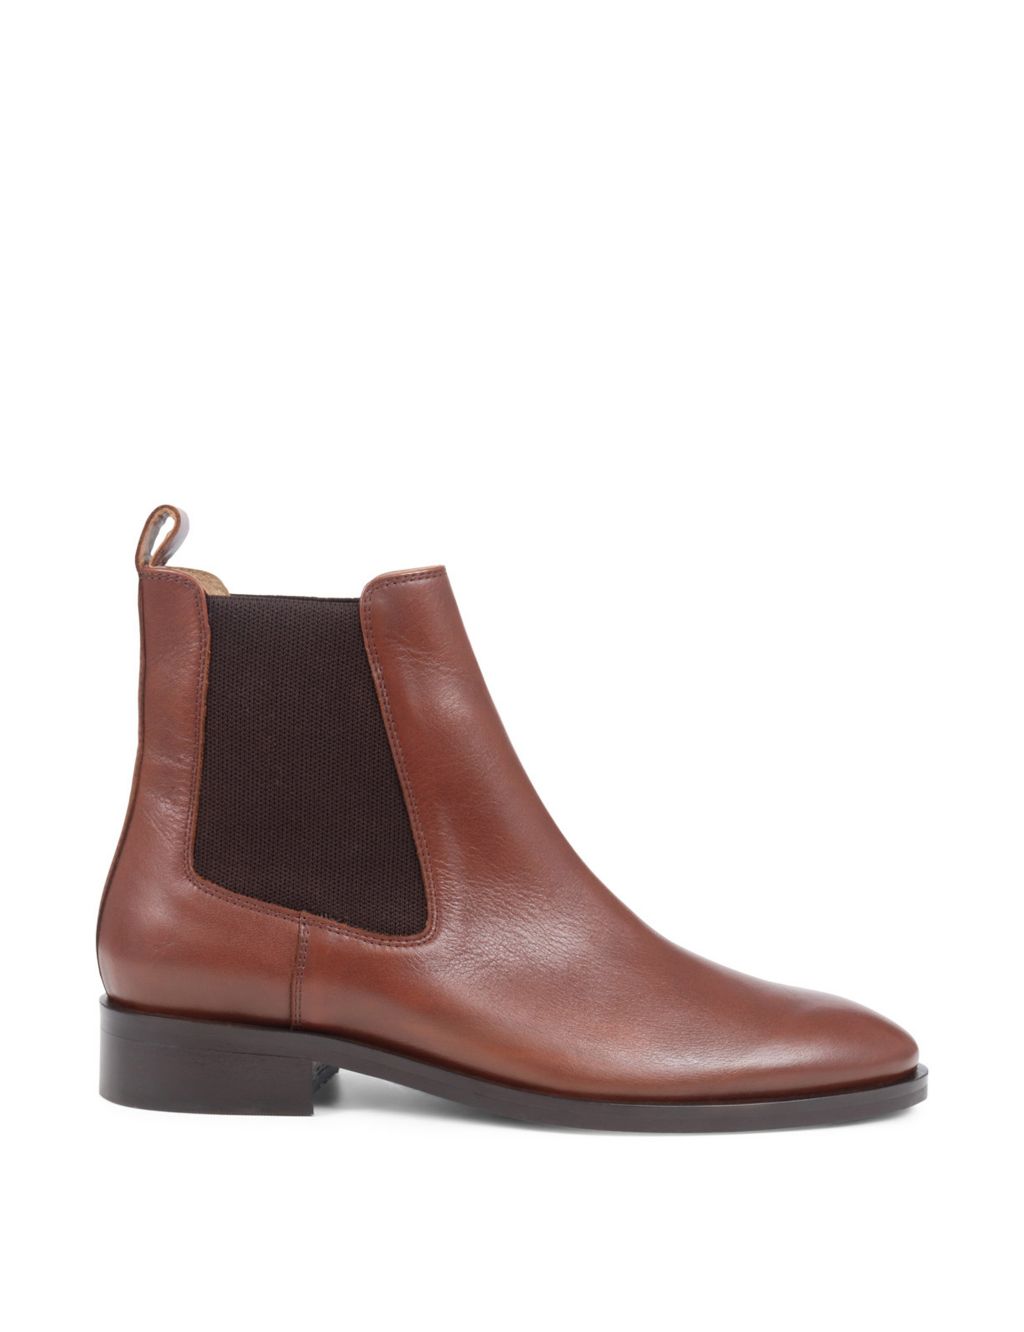 Leather Chelsea Flat Ankle Boots image 2